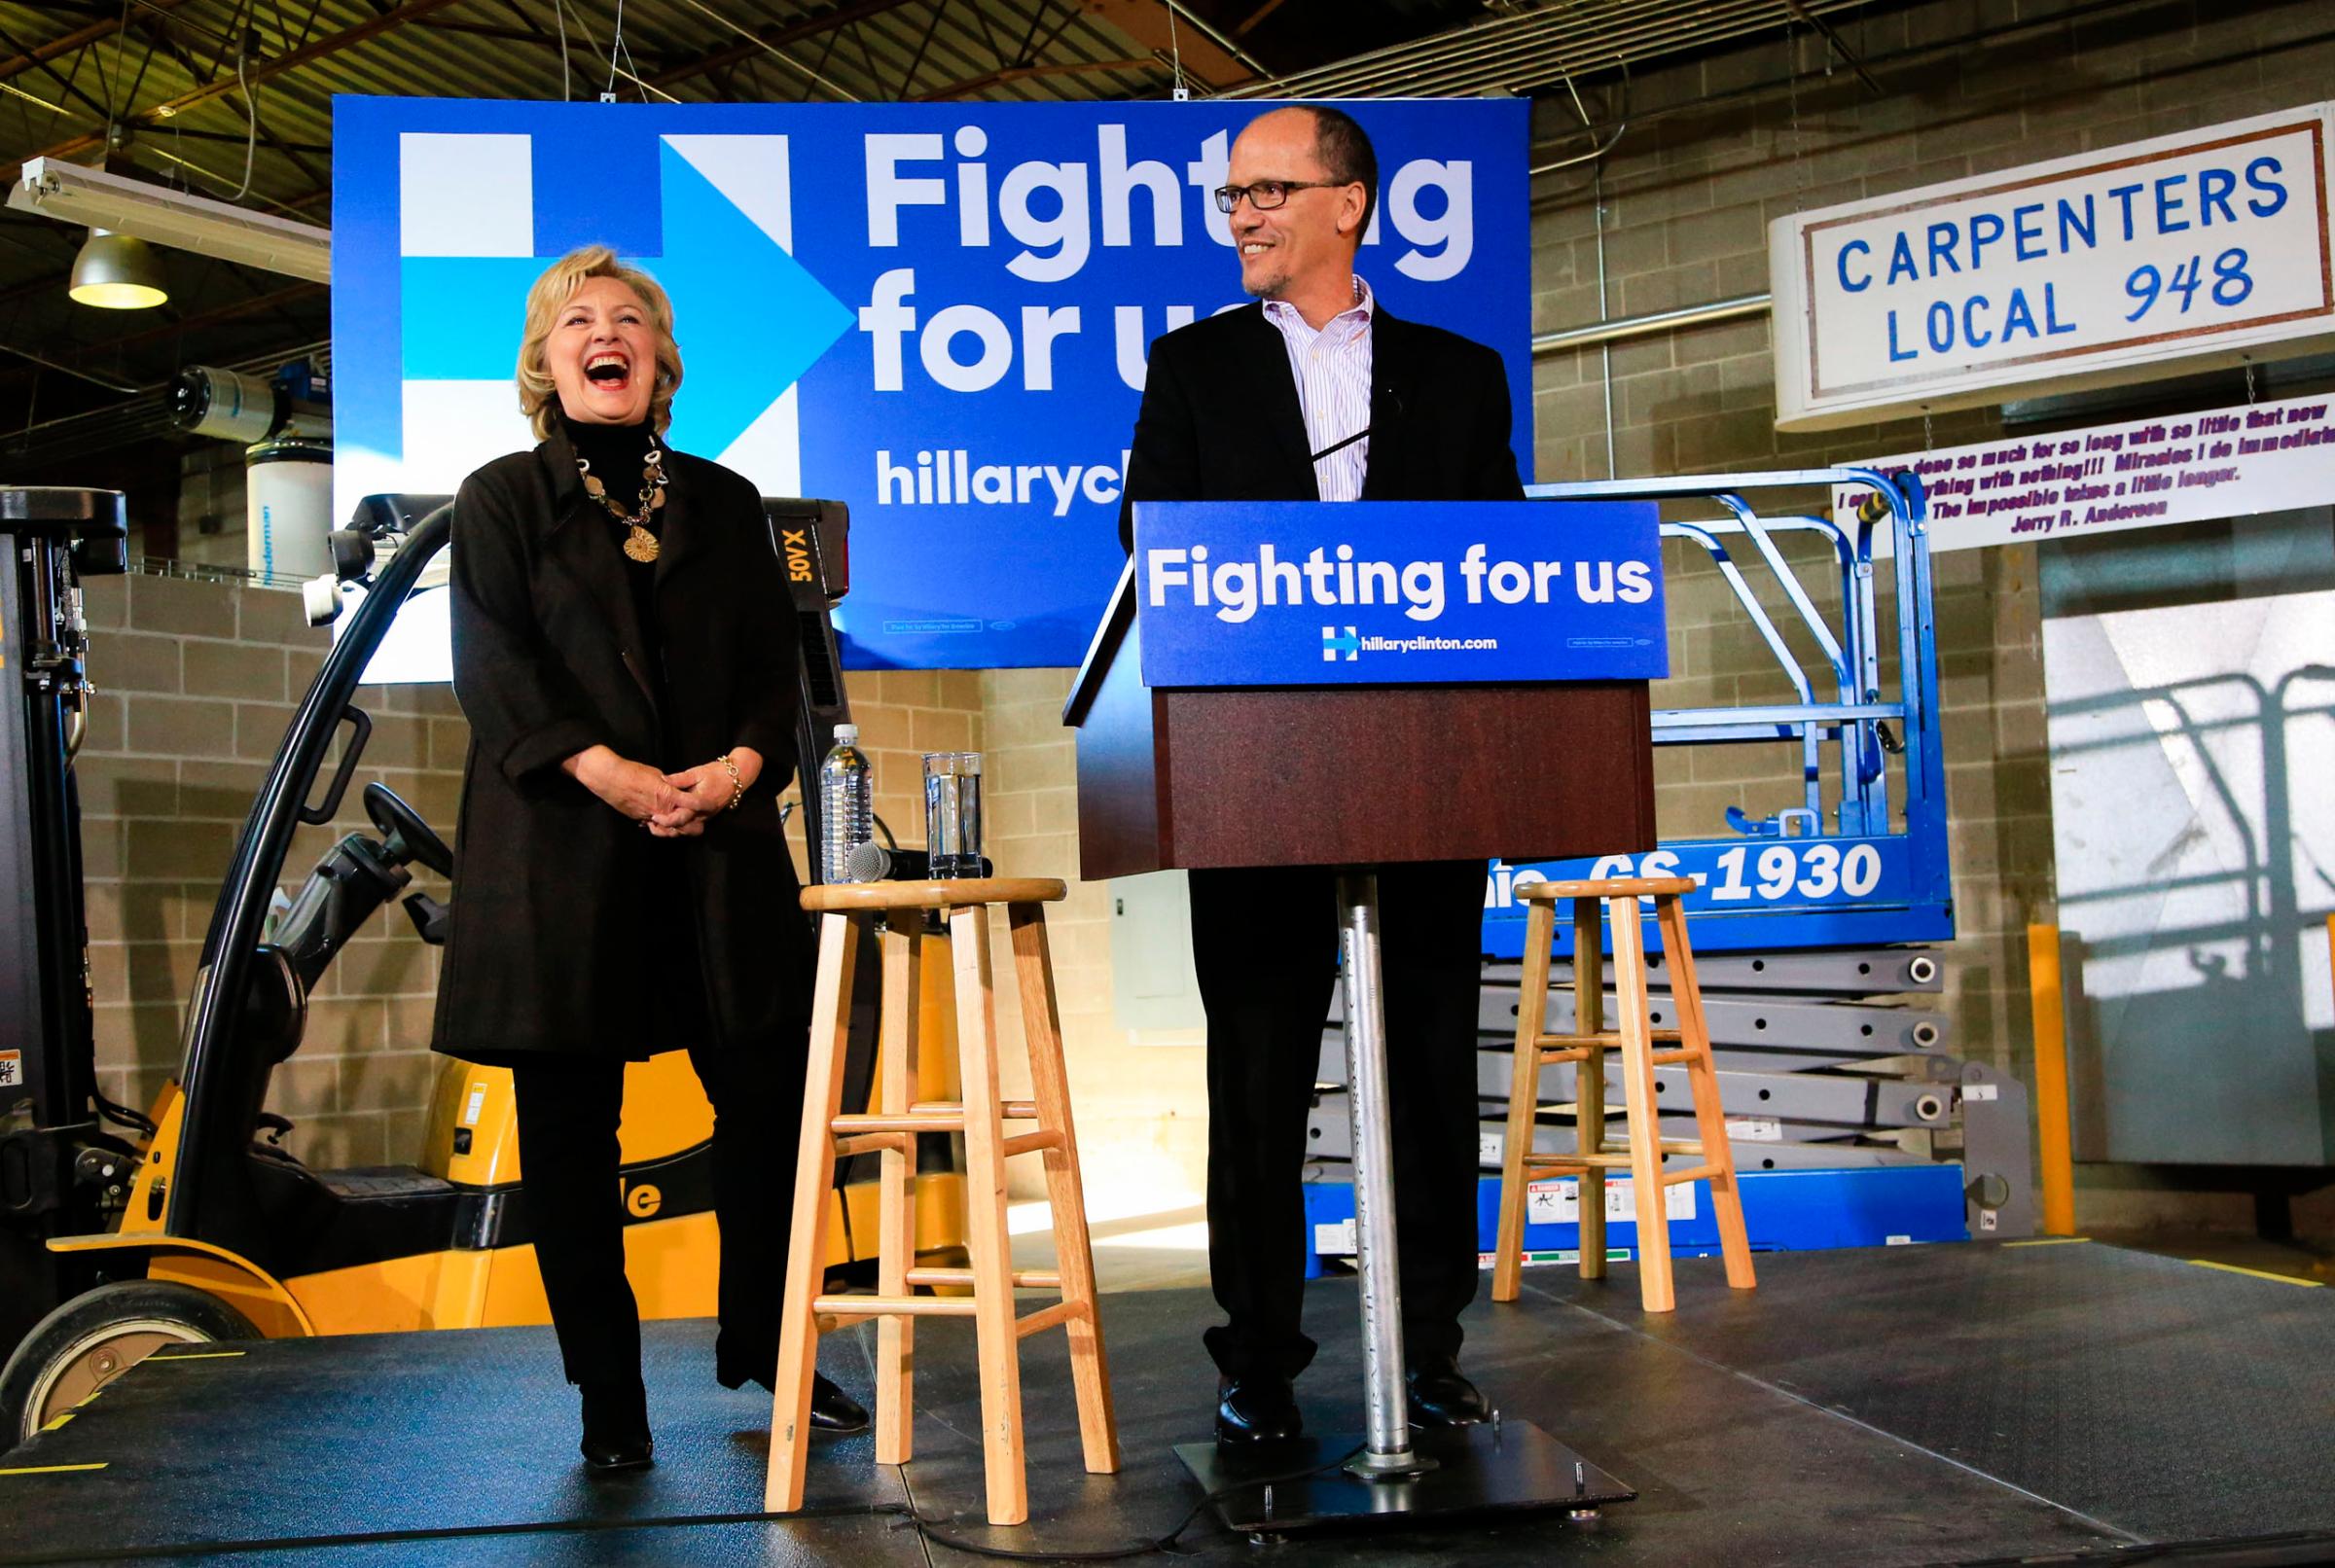 Democratic presidential candidate Hillary Clinton laughs as U.S. Secretary of Labor Tom Perez endorses her during a campaign stop in Sioux City, Iowa, on Dec. 4, 2015.